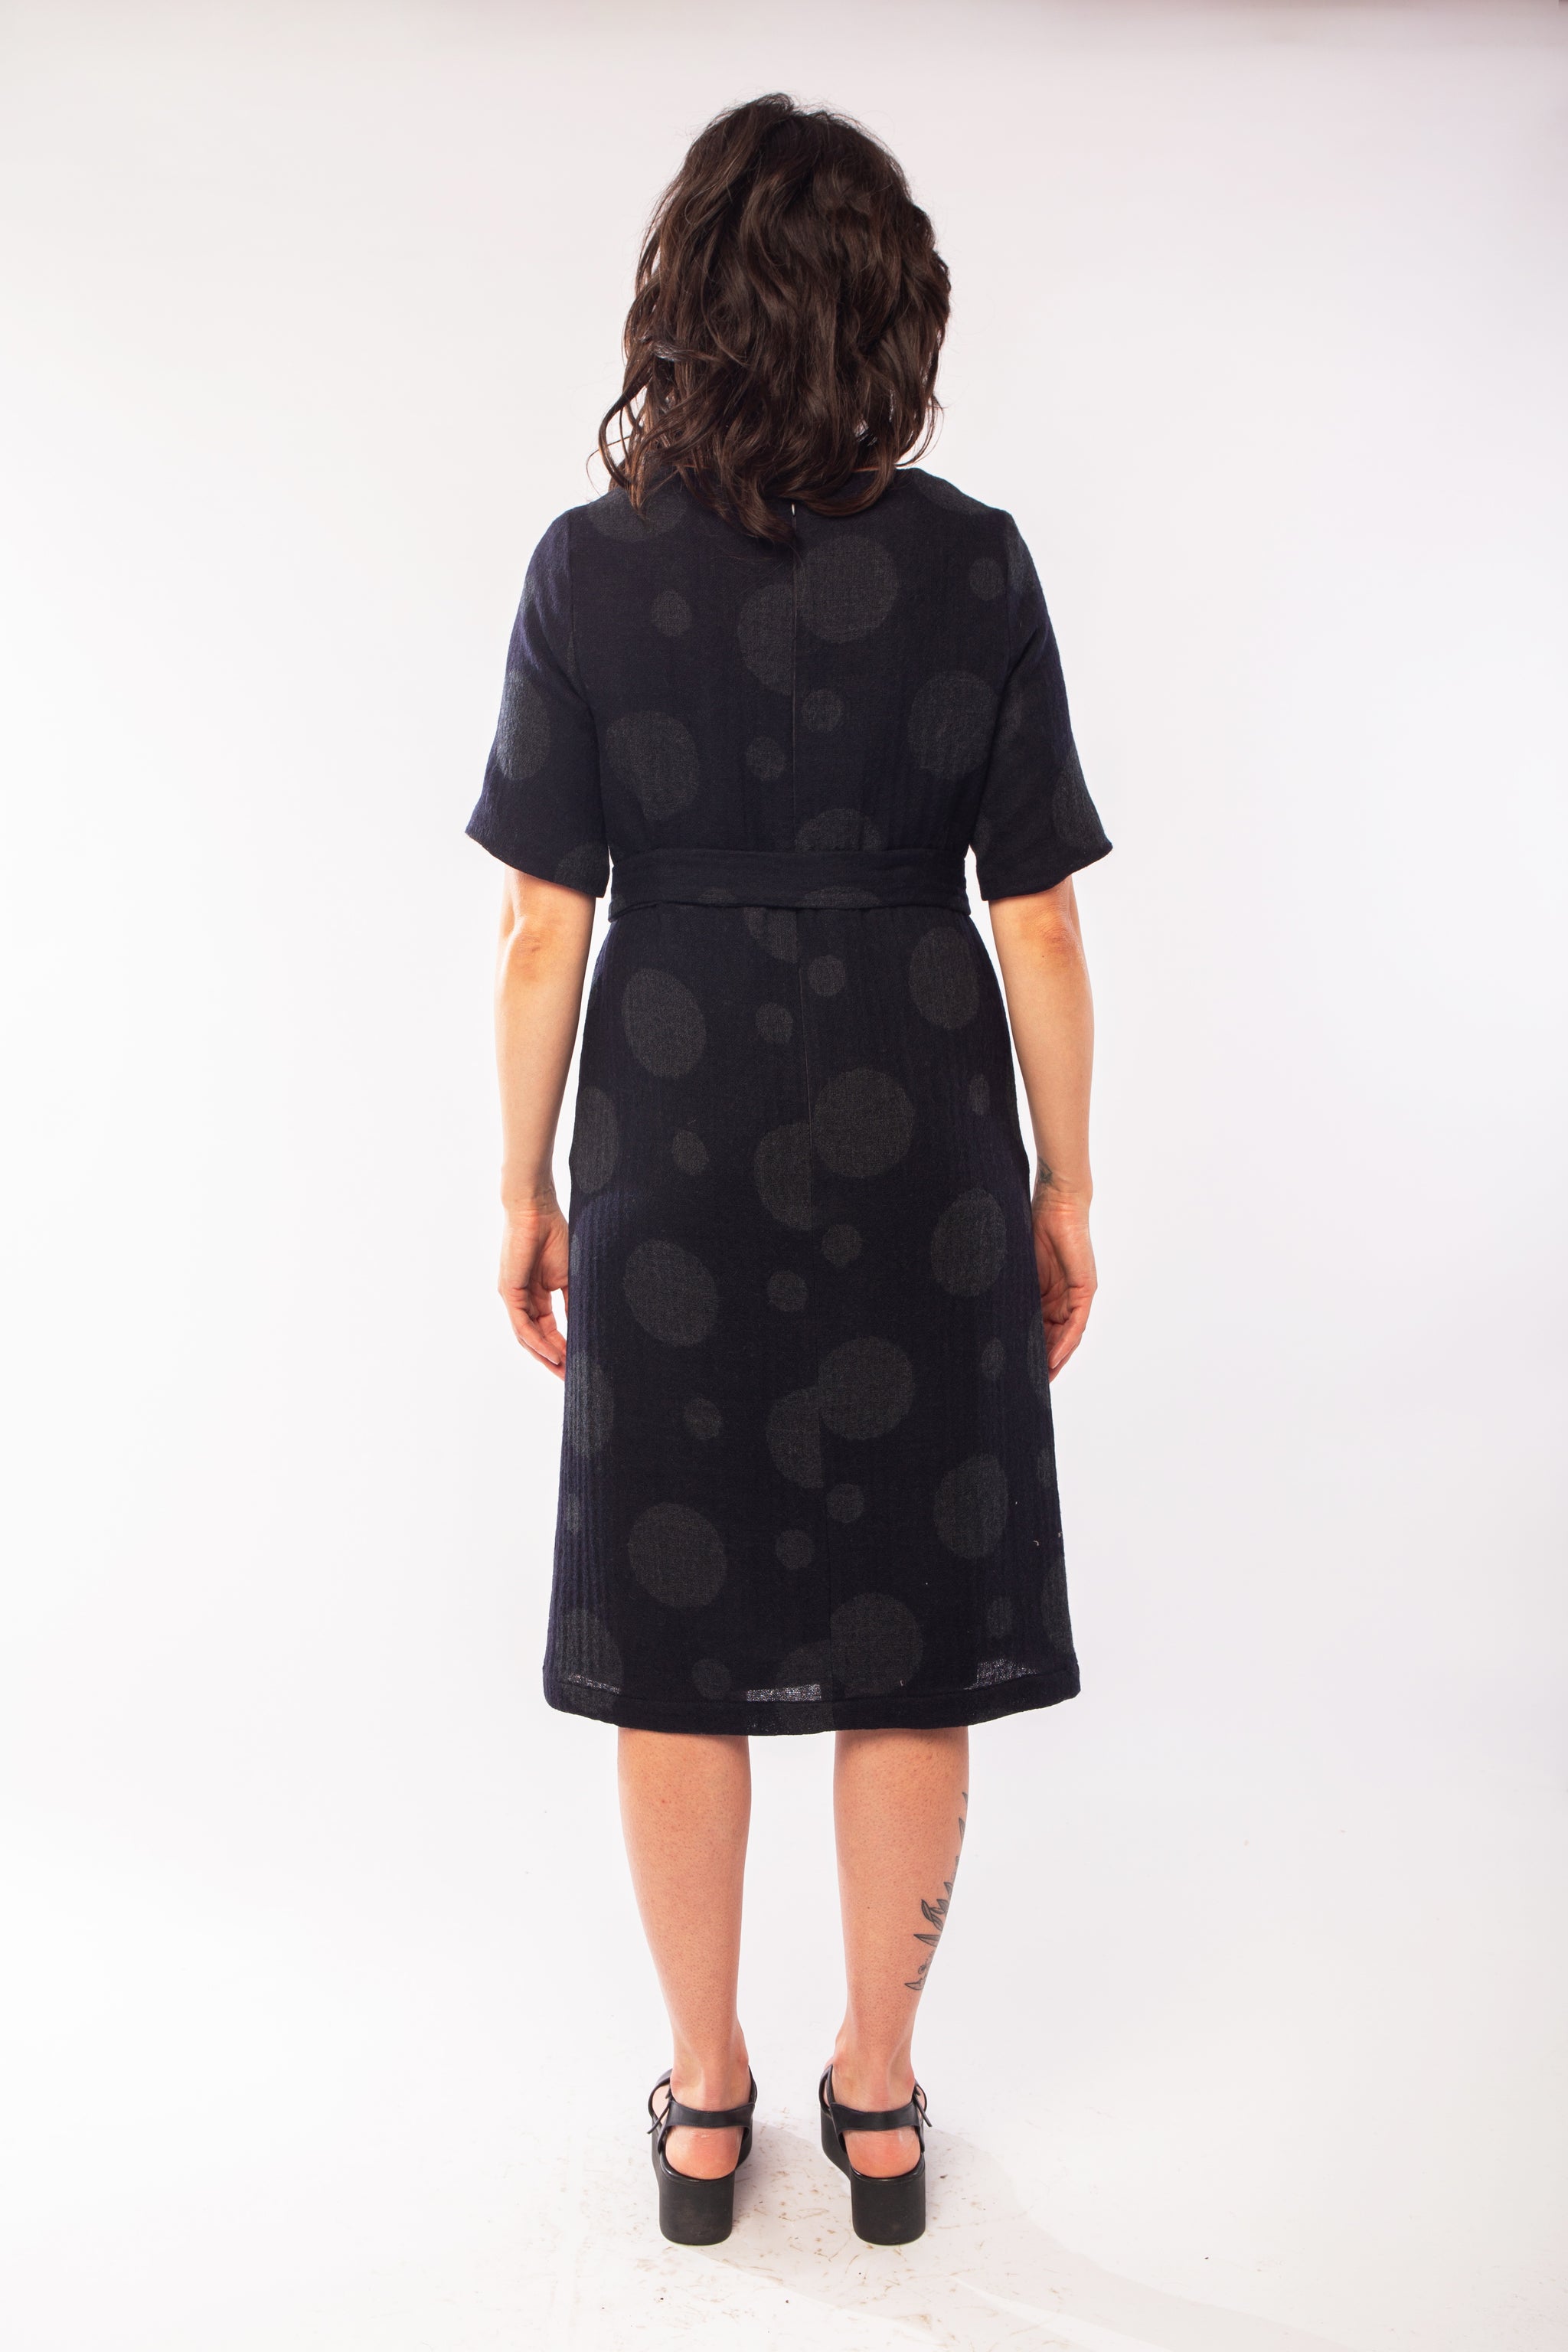 ASTRAL DRESS NAVY & CHARCOAL SPOT